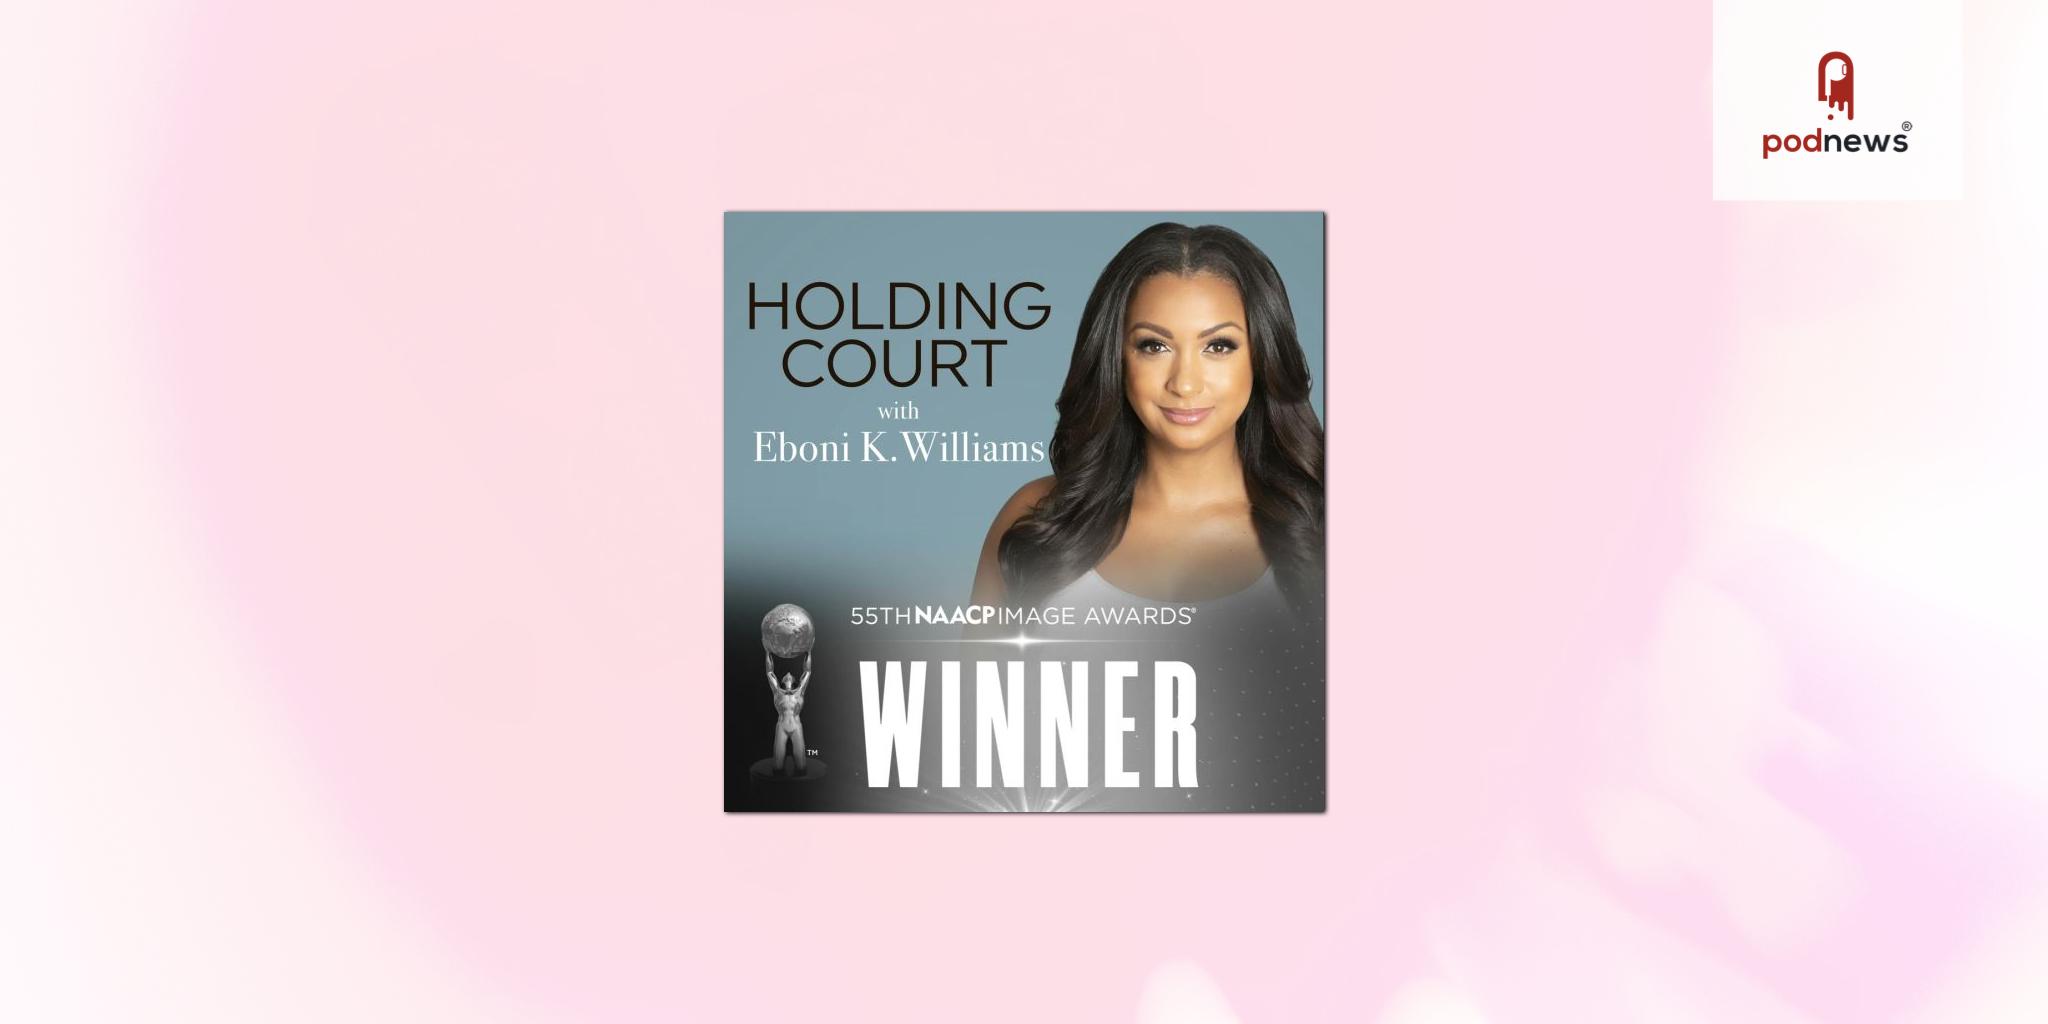 Interval Presents Welcomes Holding Court with Eboni K. Williams into Its Network